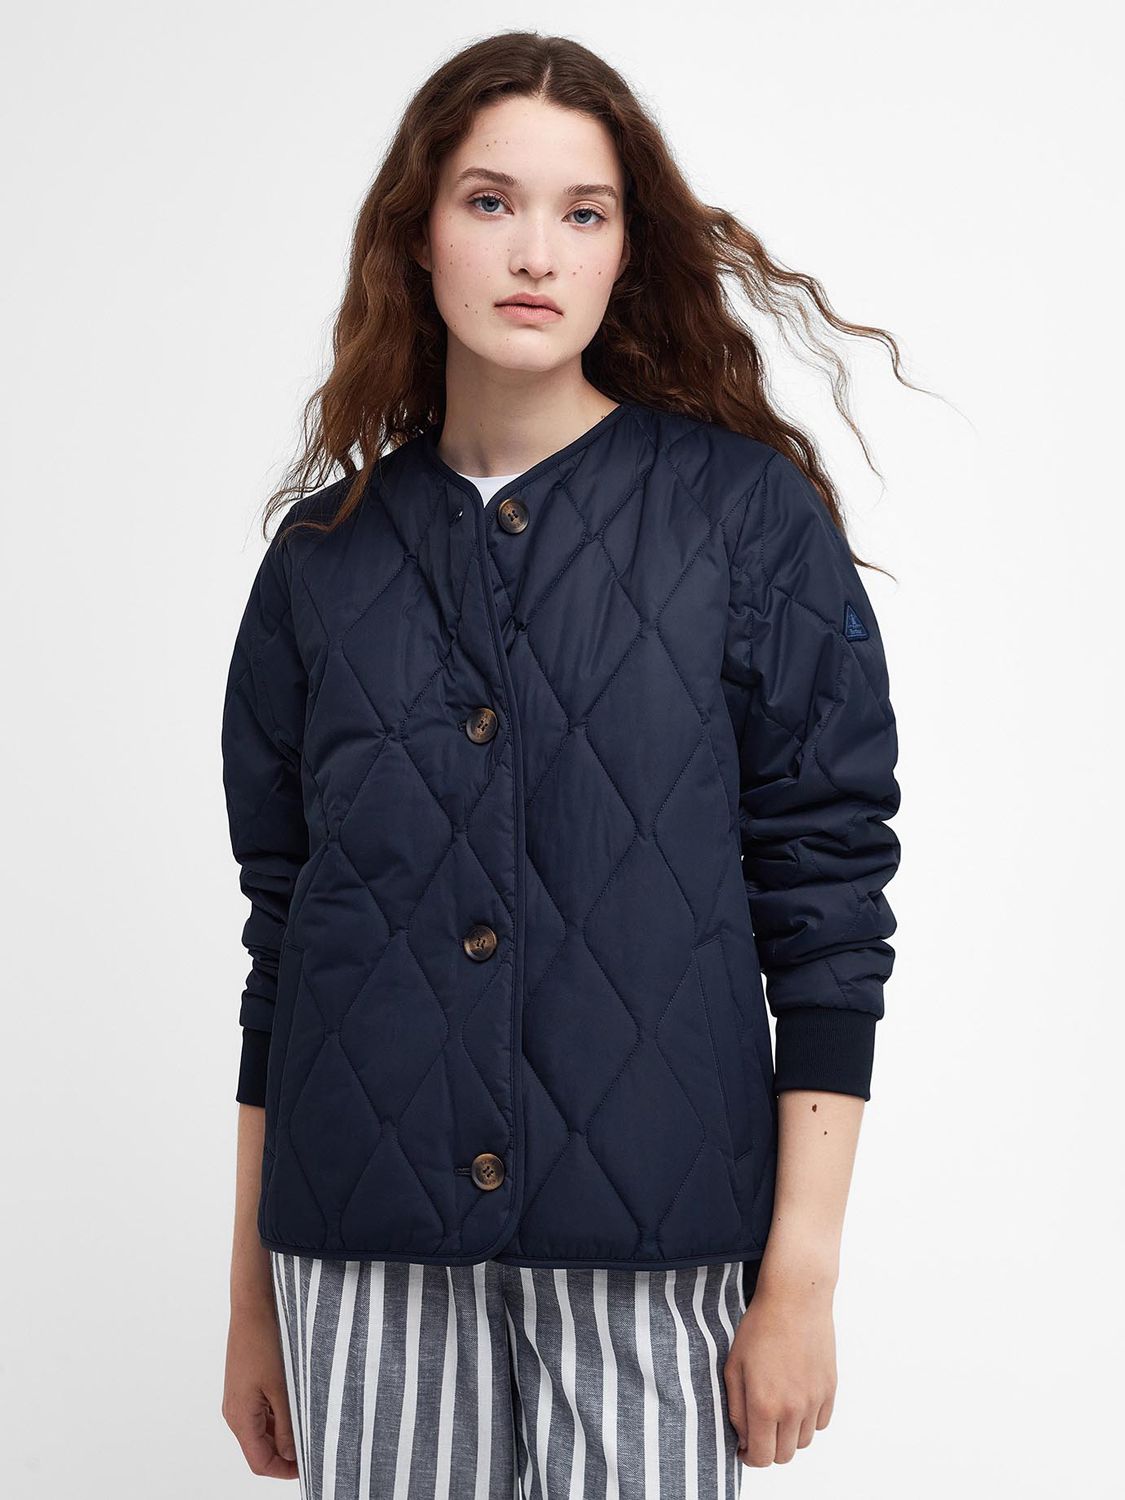 Barbour Bickland Quilted Jacket, Dark Navy at John Lewis & Partners